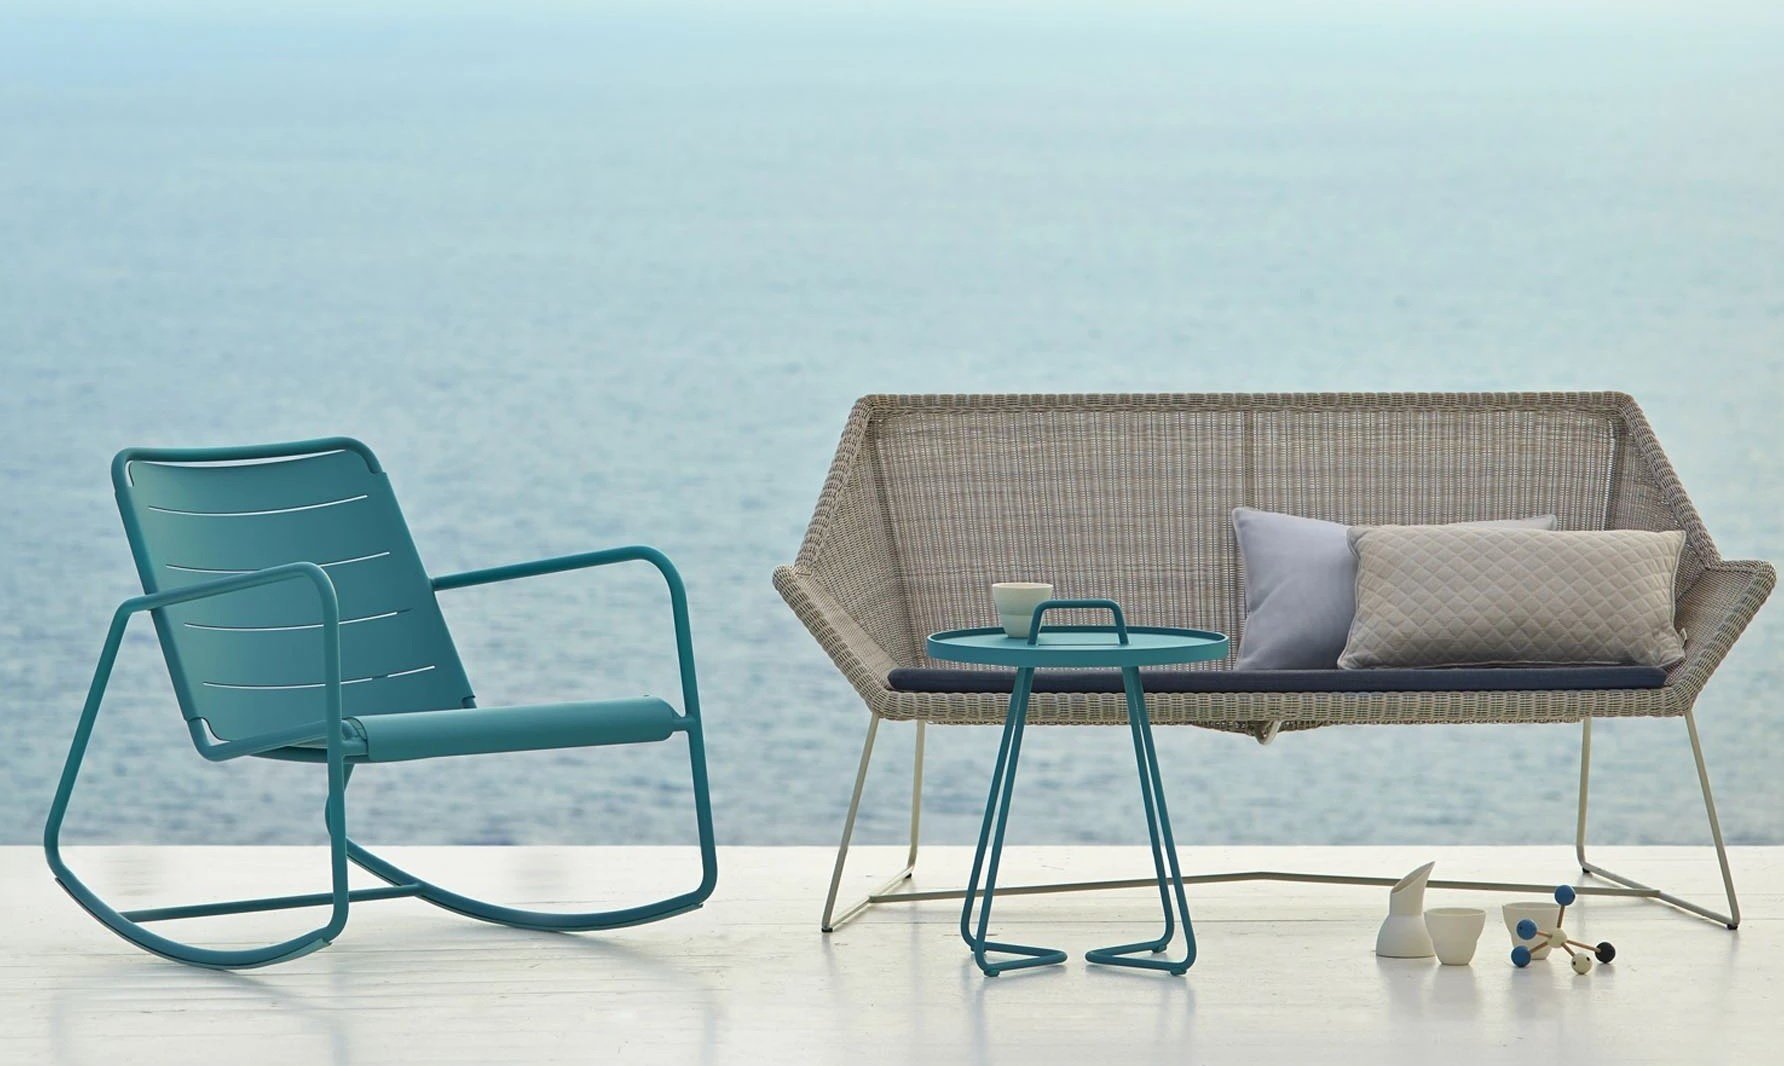 Breeze 2-Seater Sofa from Cane-line, designed by Strand+Hvass